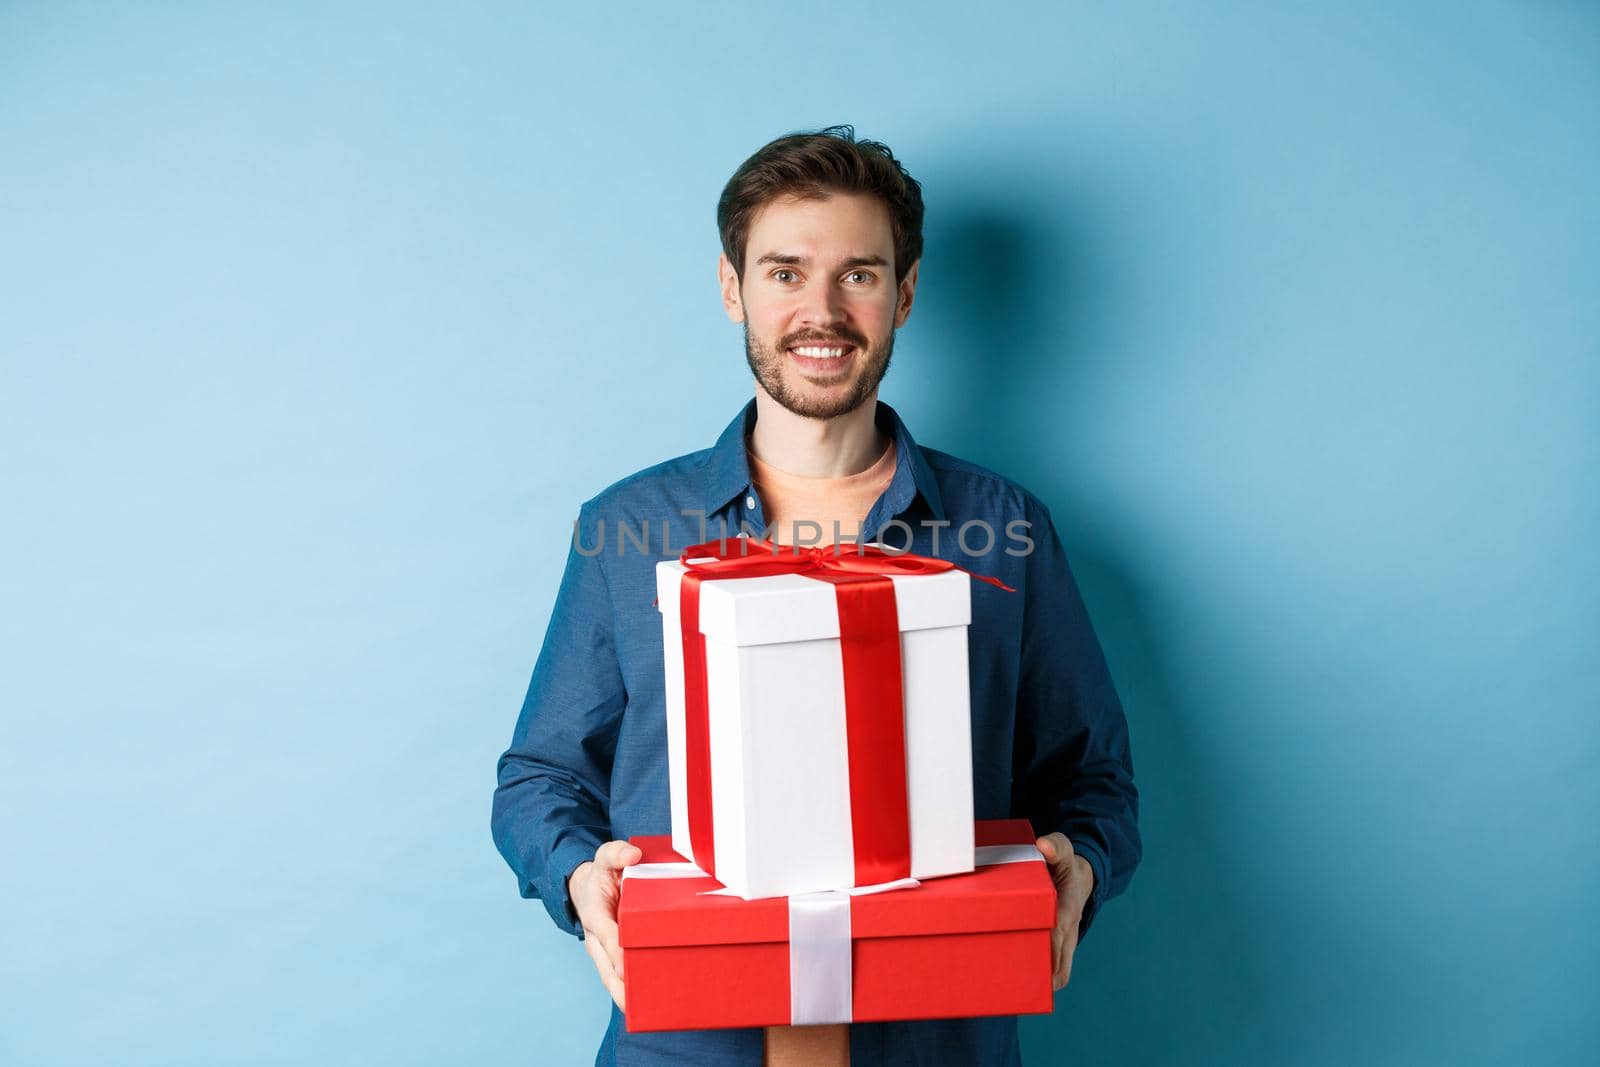 Happy valentines day. Handsome boyfriend holding gifts for lover on romantic date anniversary, standing over blue background.